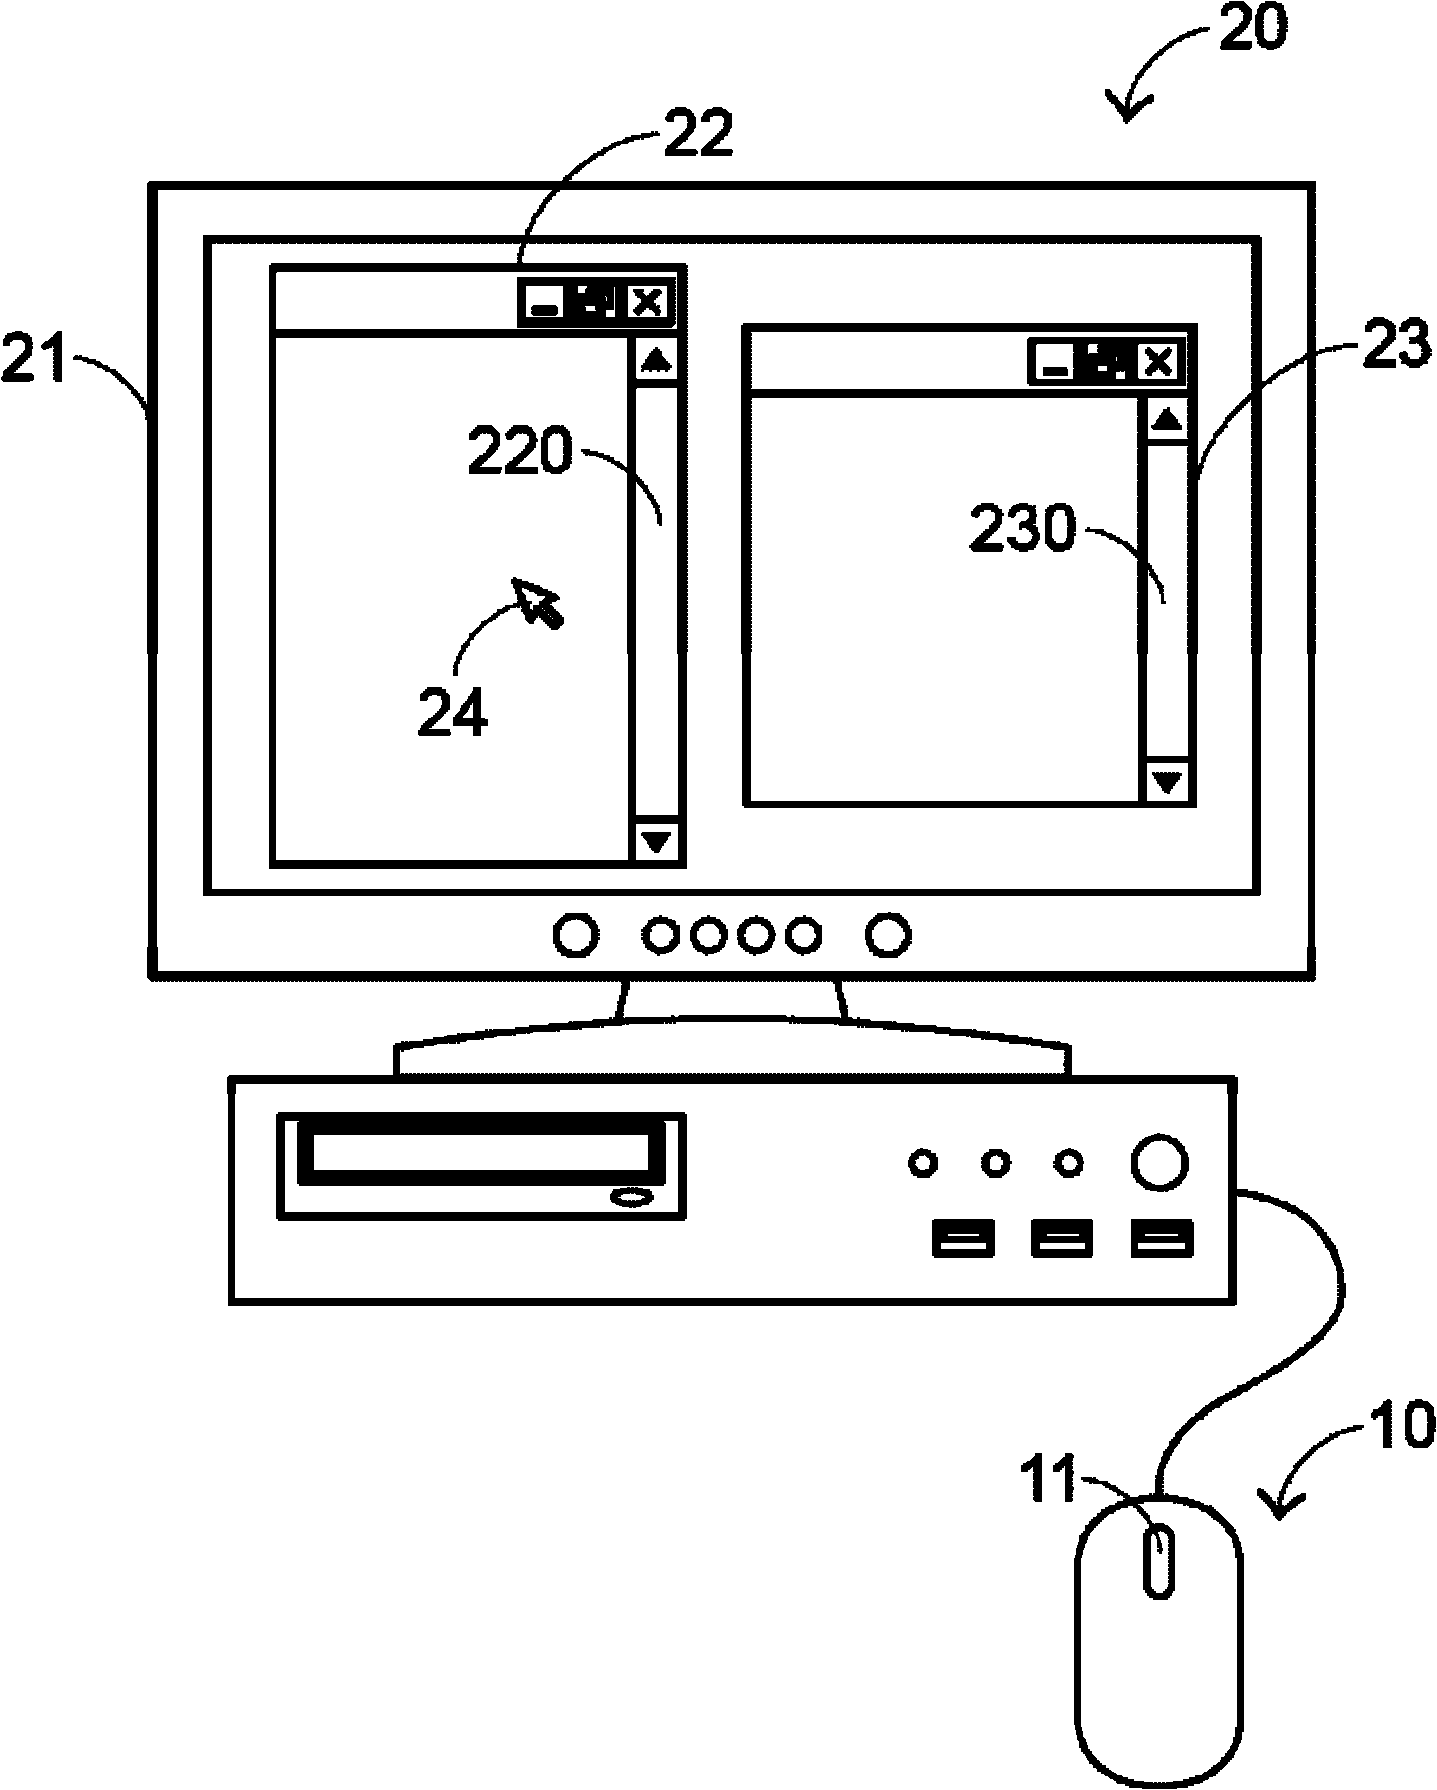 Computer peripheral device and method for controlling different window scroll bars